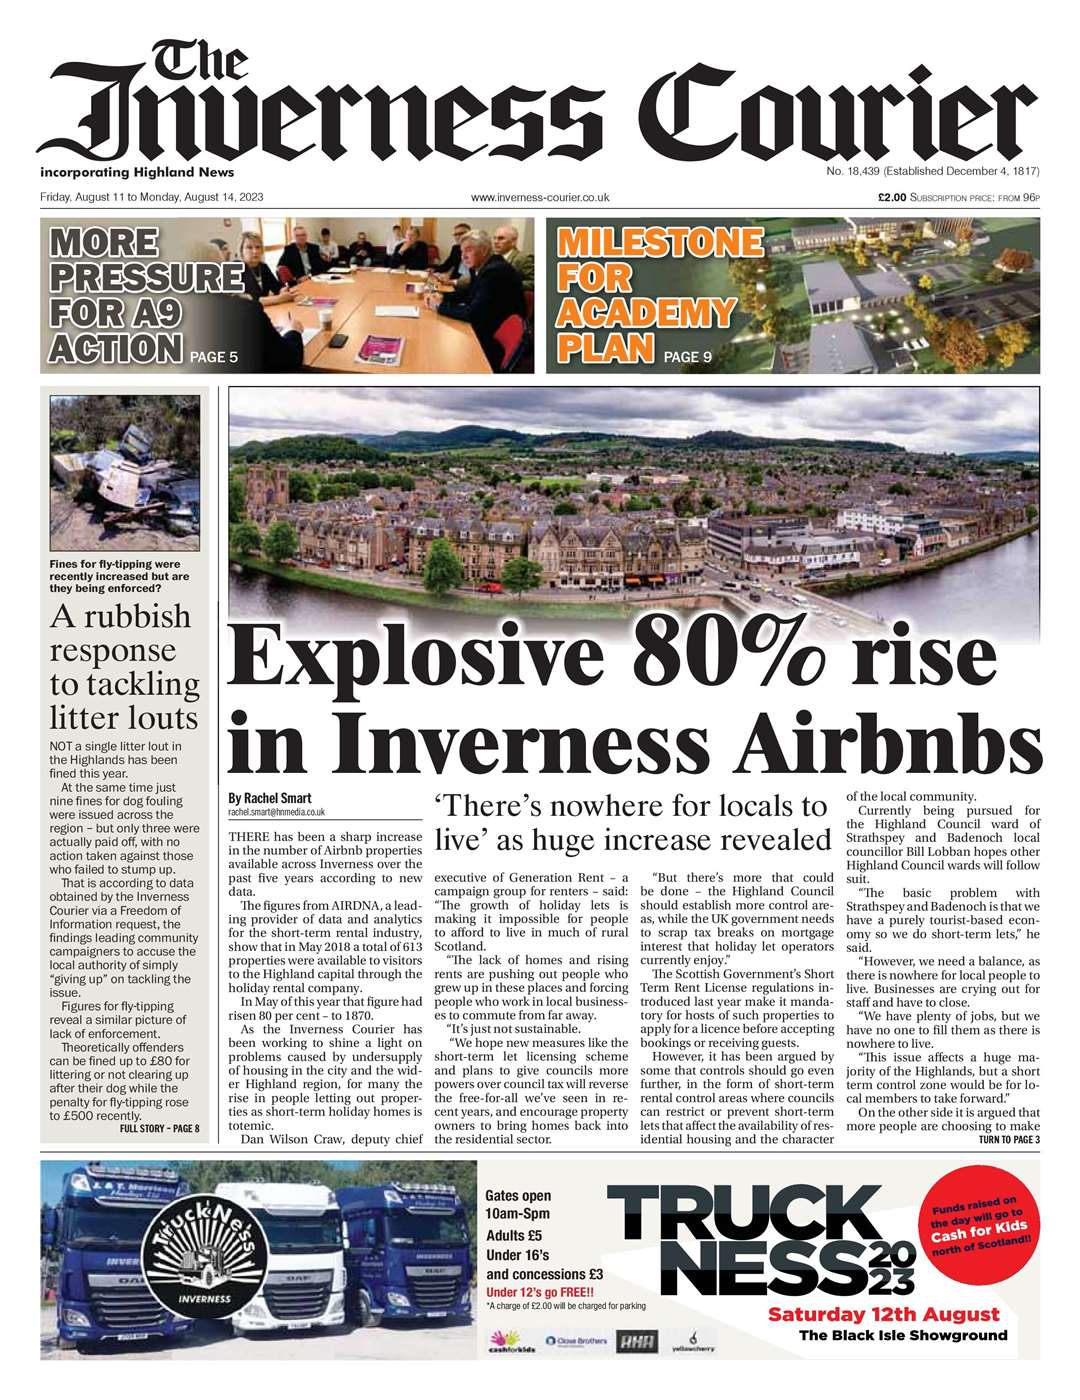 The Inverness Courier, August 11, front page.